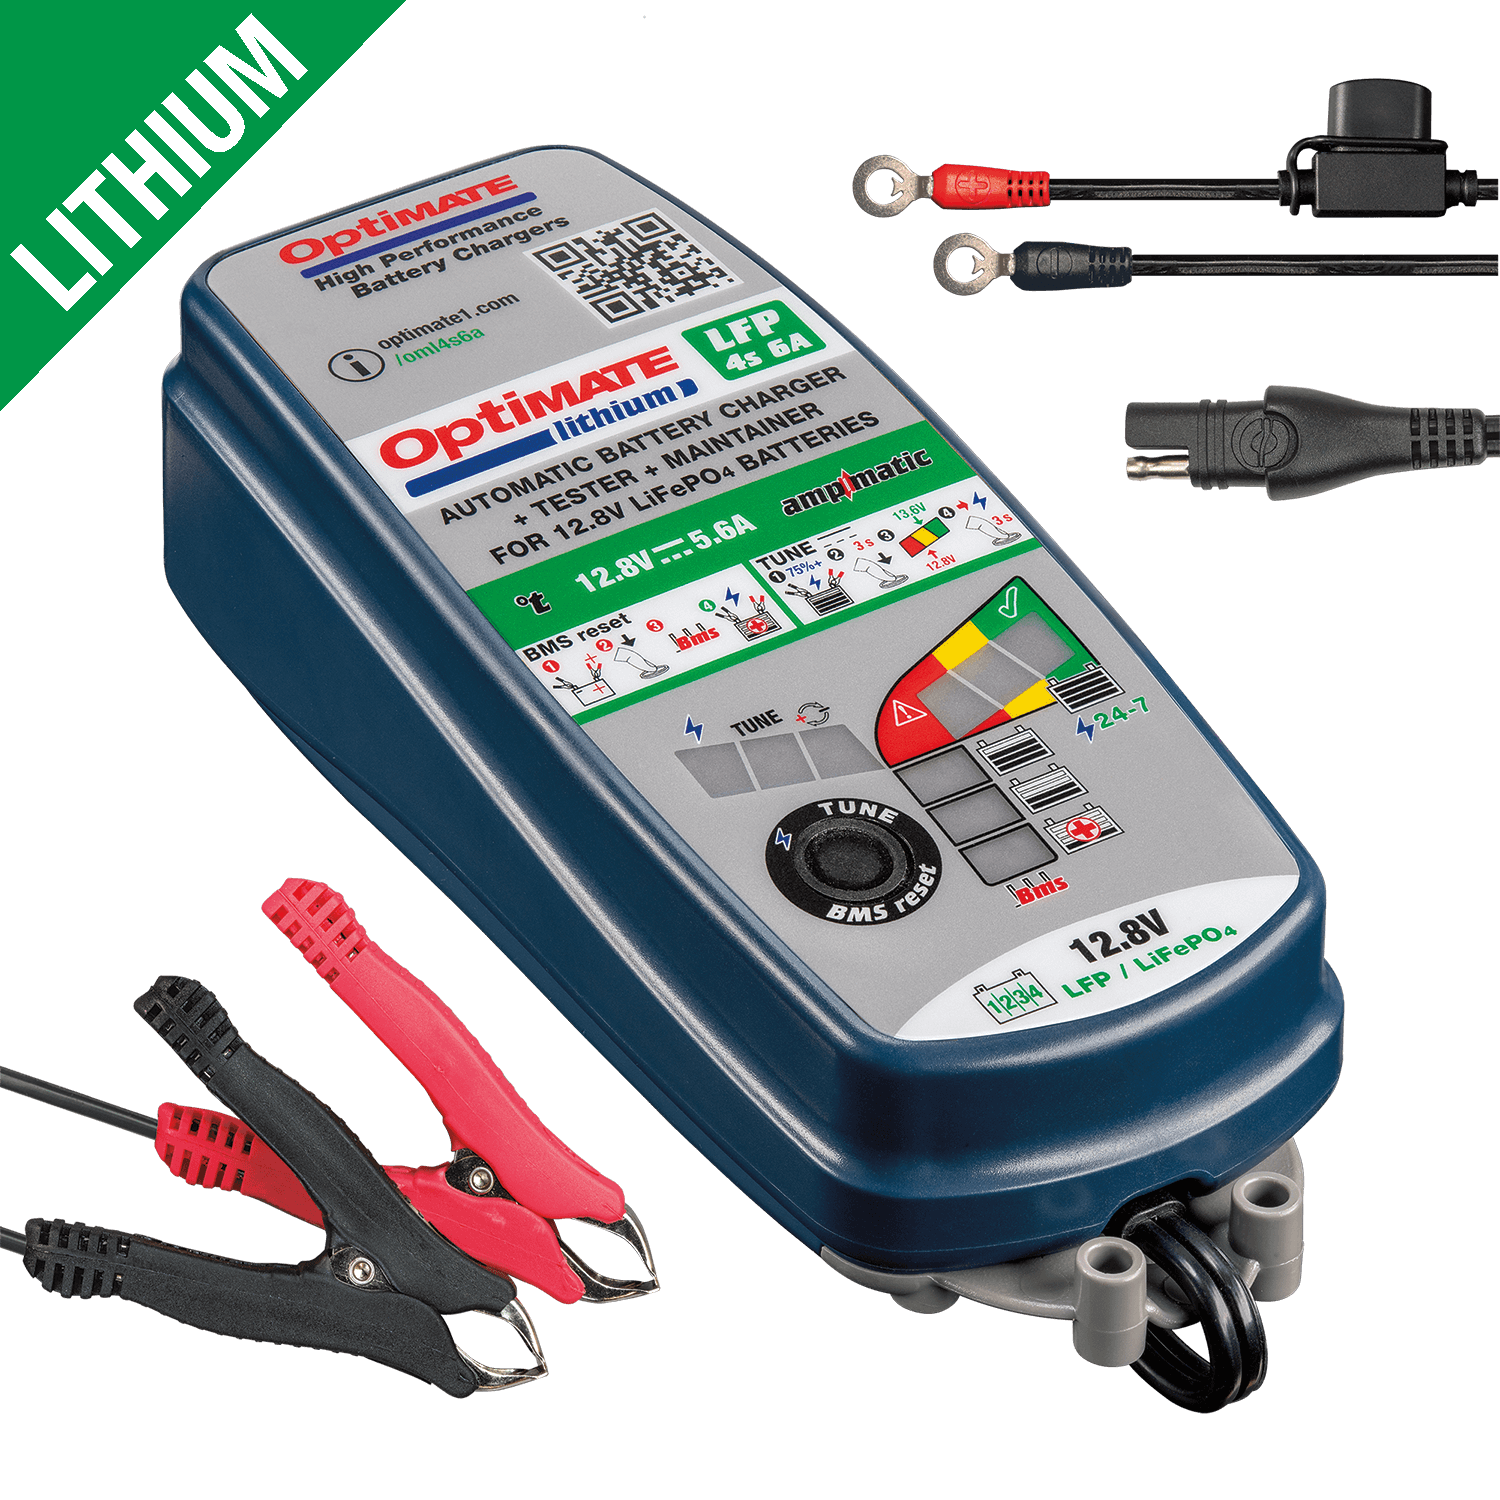 Battery charger Optimate Lithium 4s 6A (TM-390)